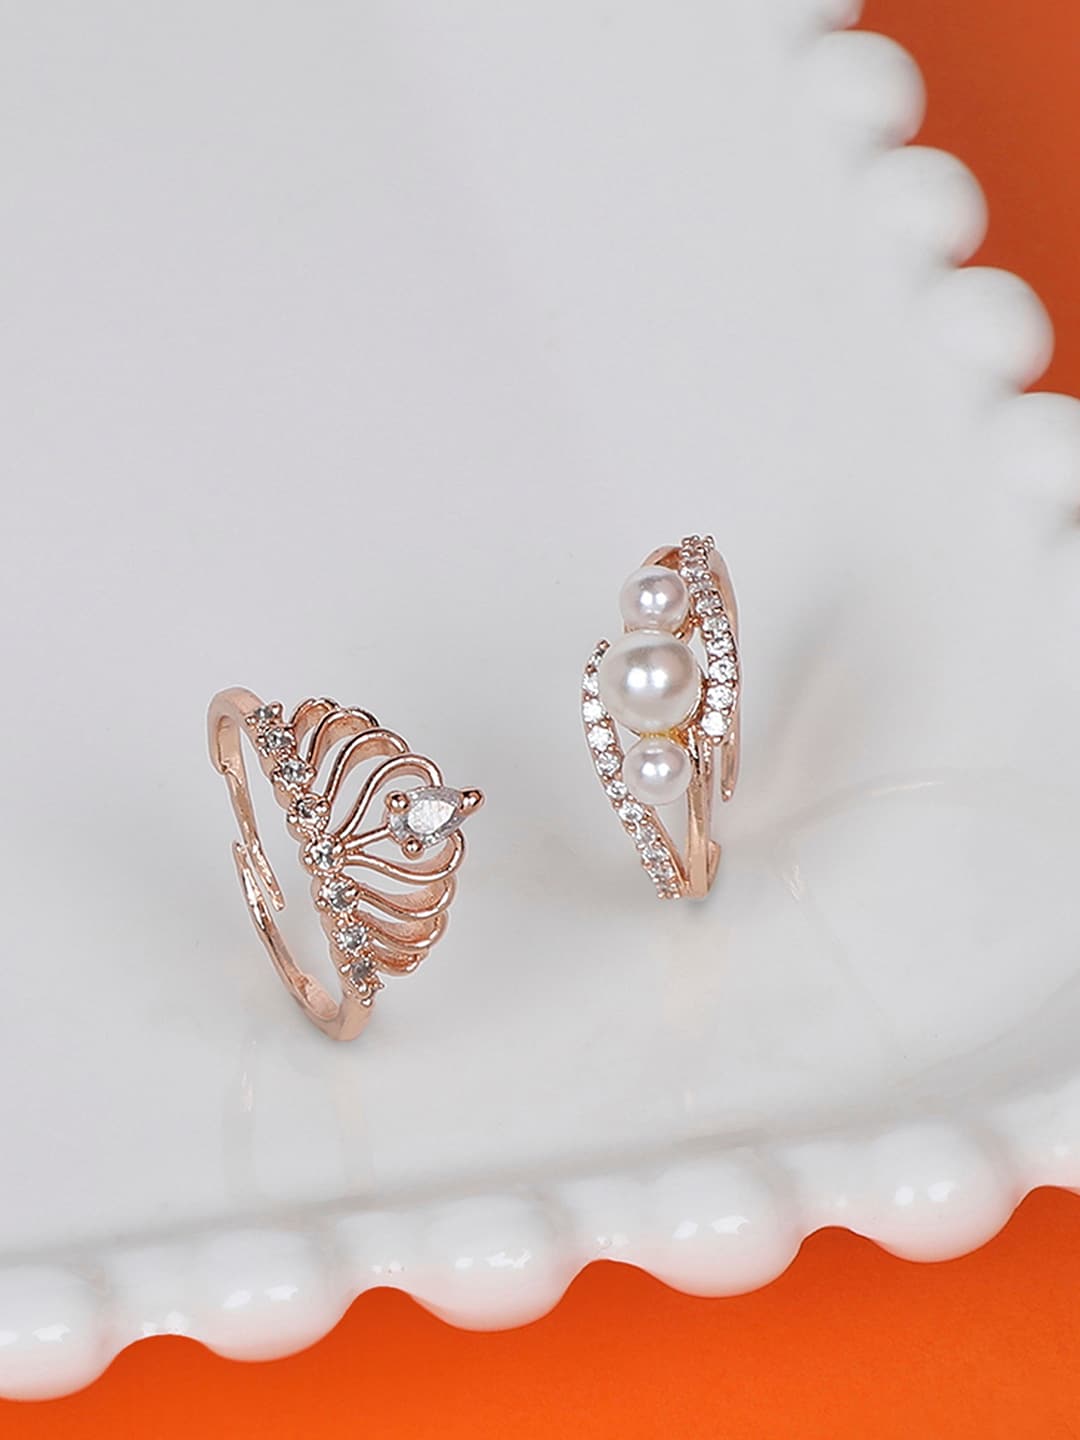 Zaveri Pearls Set Of 2 Rose Gold-Plated White CZ-Studded & Beaded Adjustable Contemporary Finger Rings Price in India